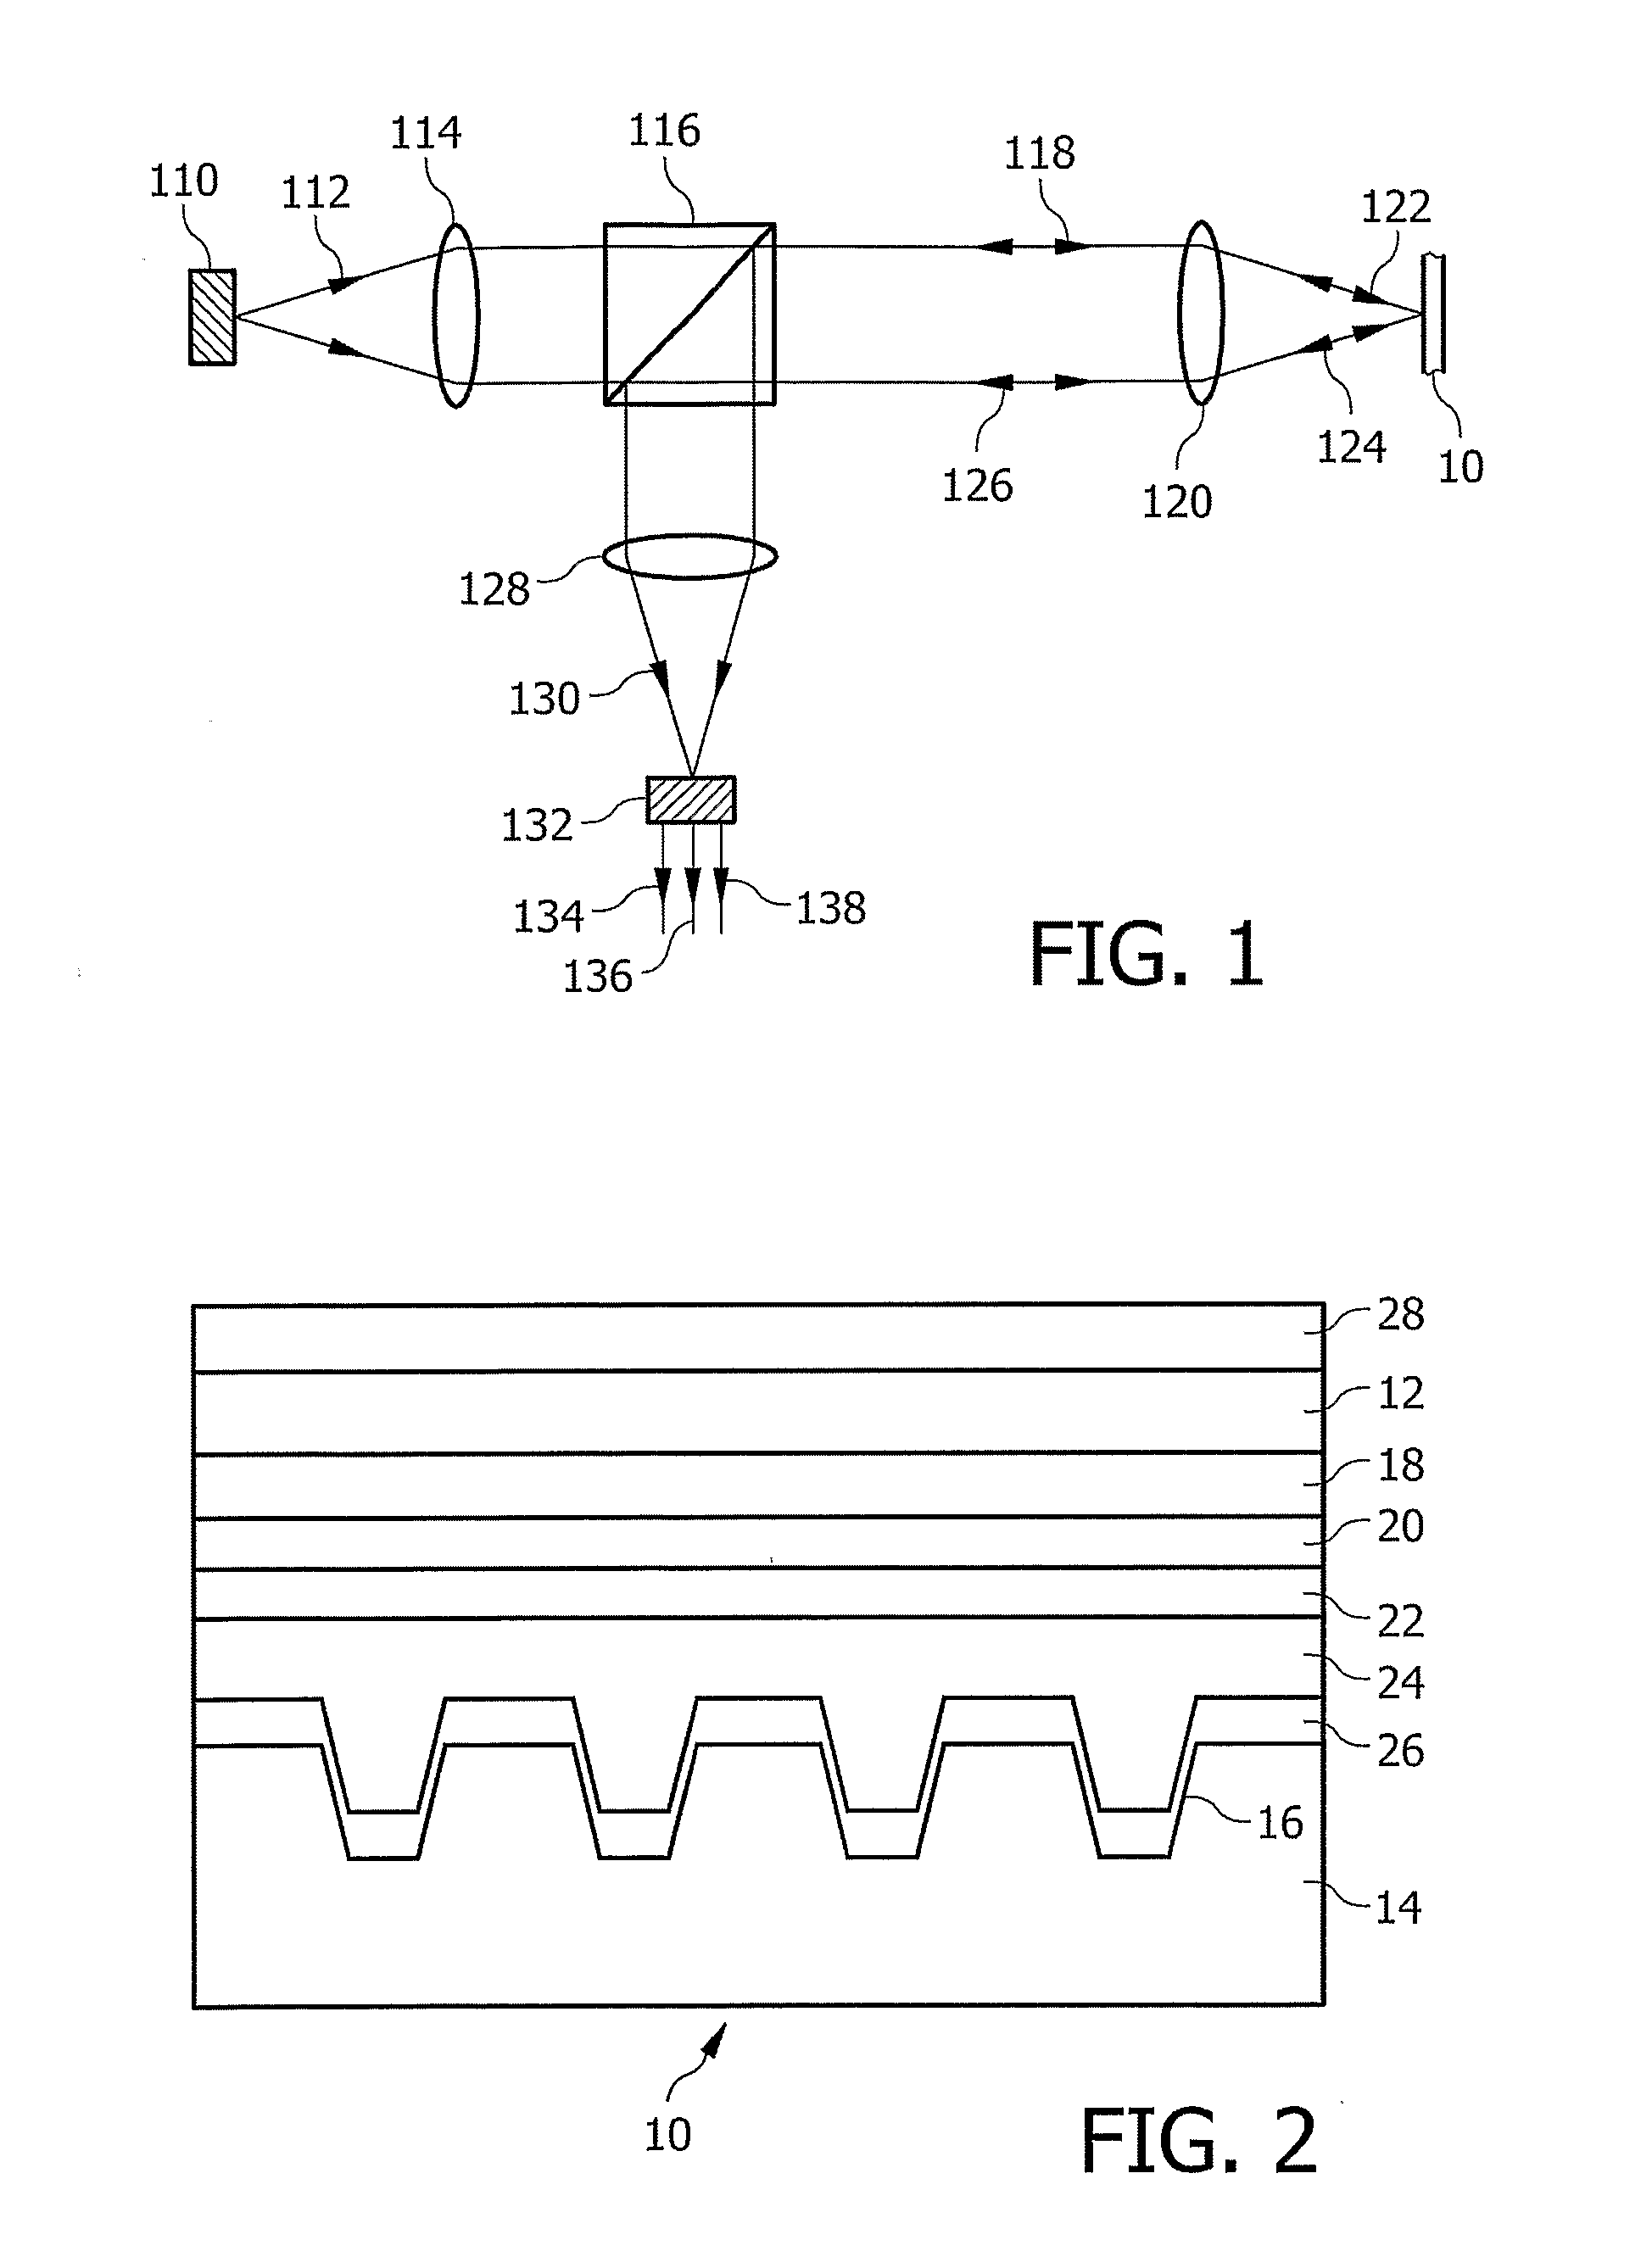 Master Substrate and Method of Manufacturing a High-Density Relief Structure